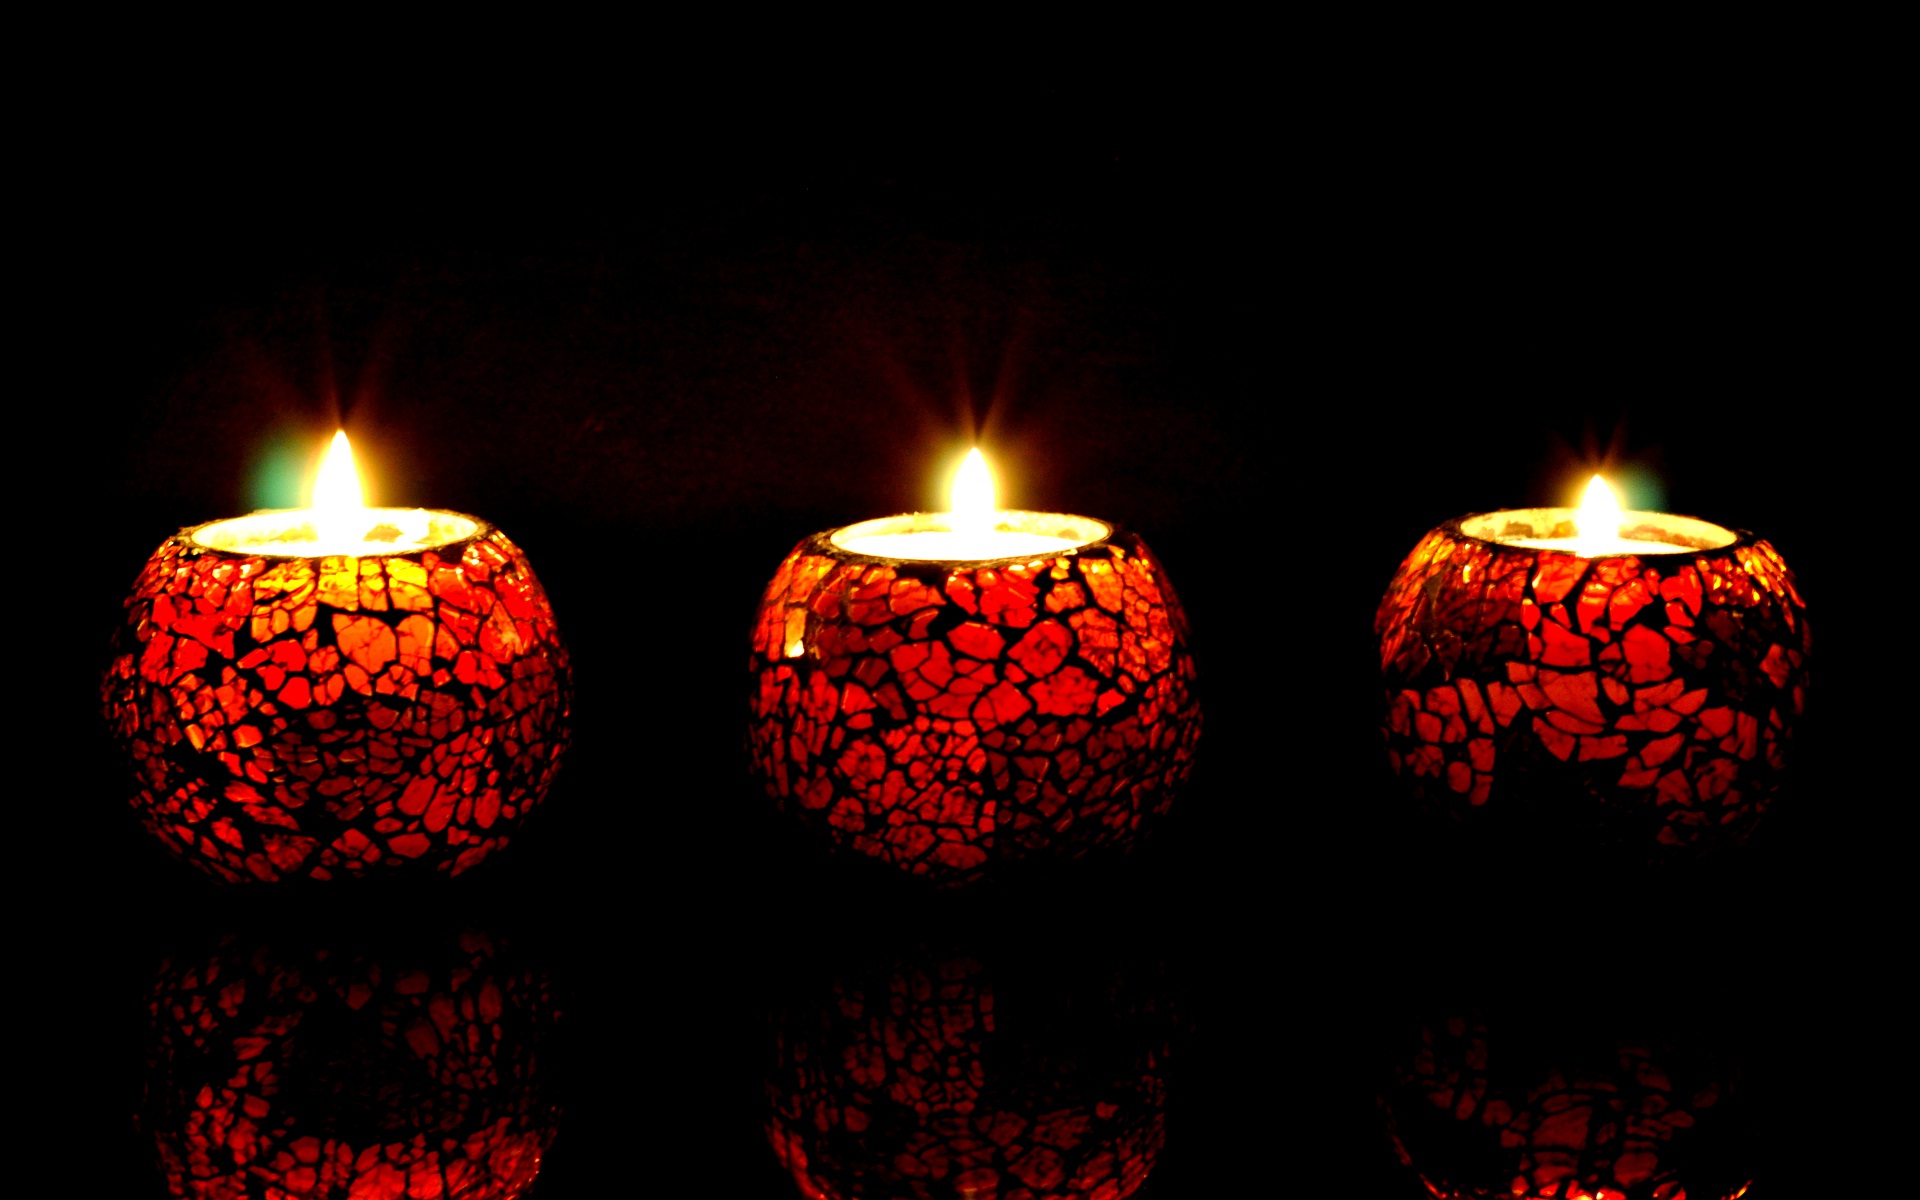 candles 2